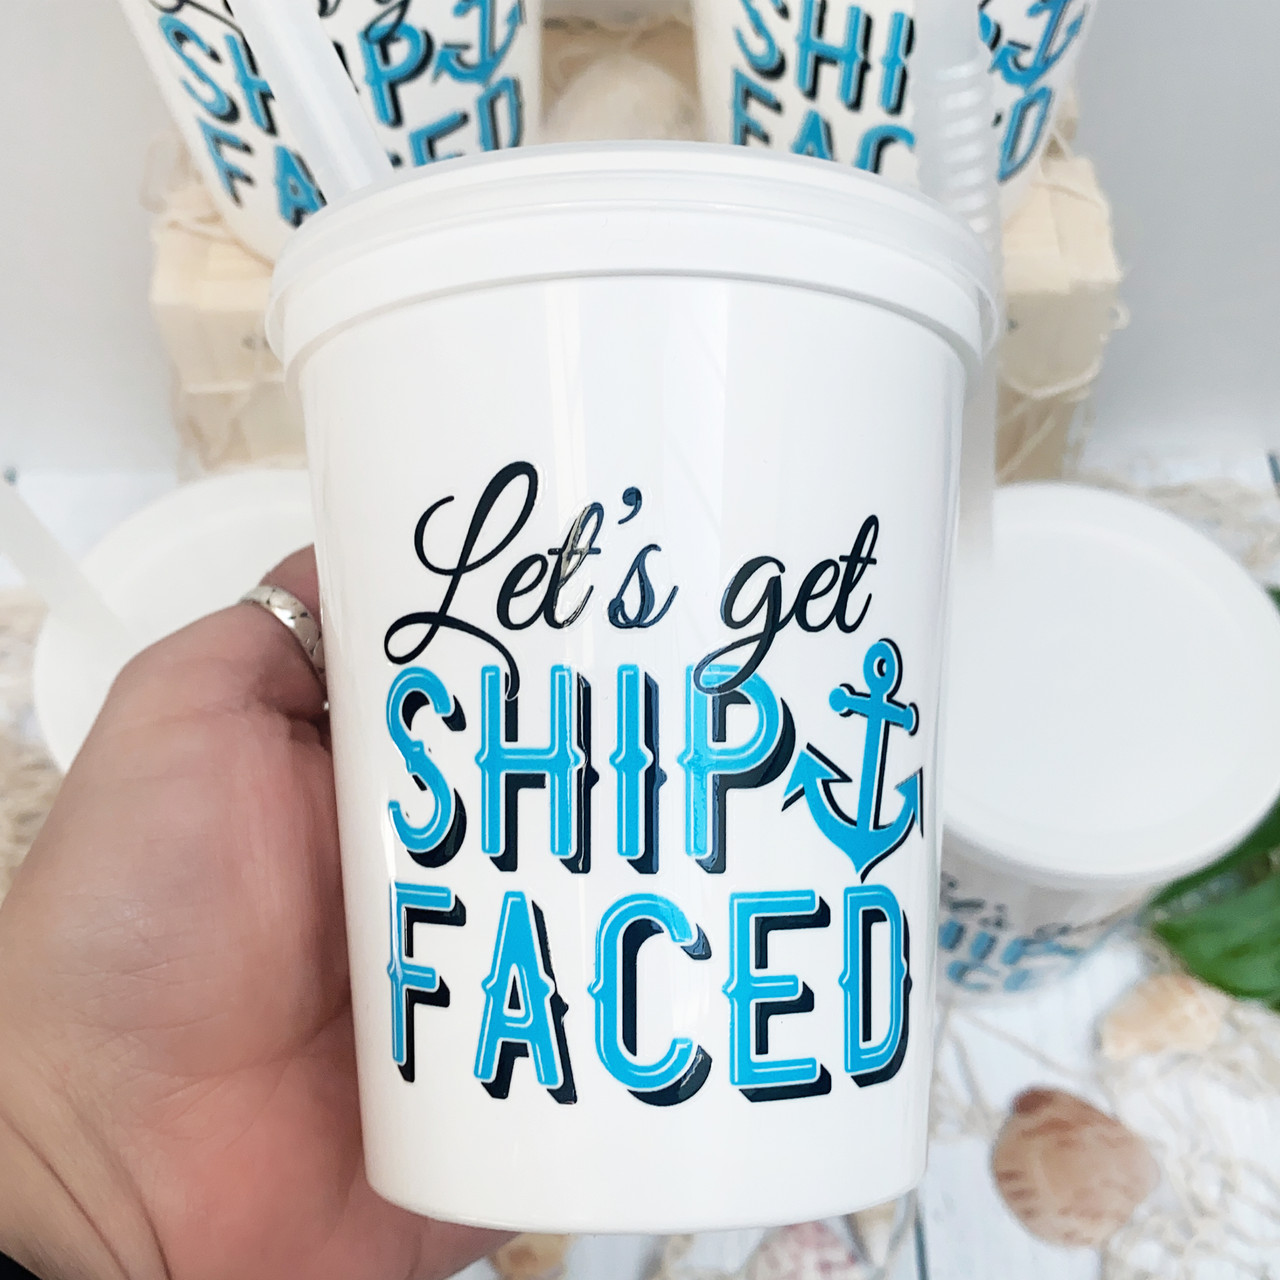 https://cdn11.bigcommerce.com/s-5grzuu6/images/stencil/1280x1280/products/6564/53976/Ship-Faced-Tumblers-2__22586.1682974719.jpg?c=2